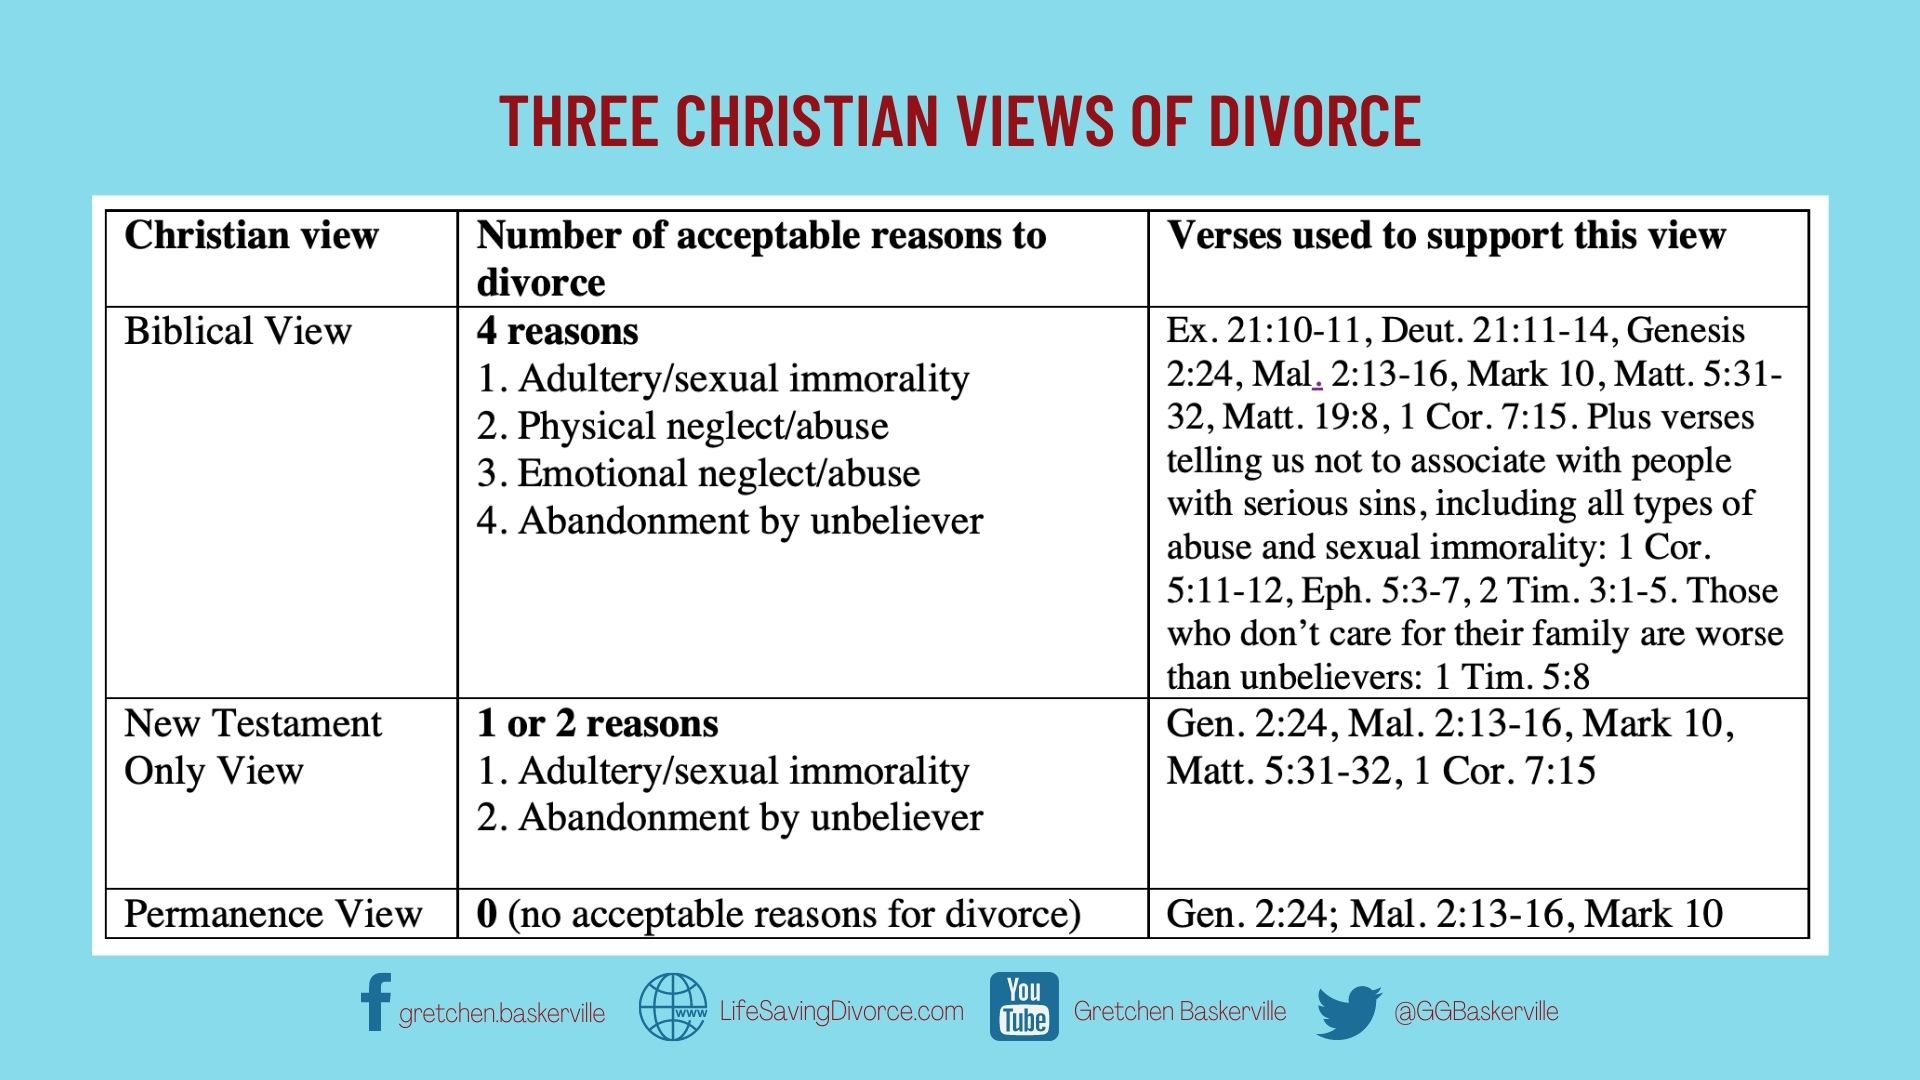 Chart showing Three Christian Views of Divorce: Biblical view, New Testament view, Permanence View